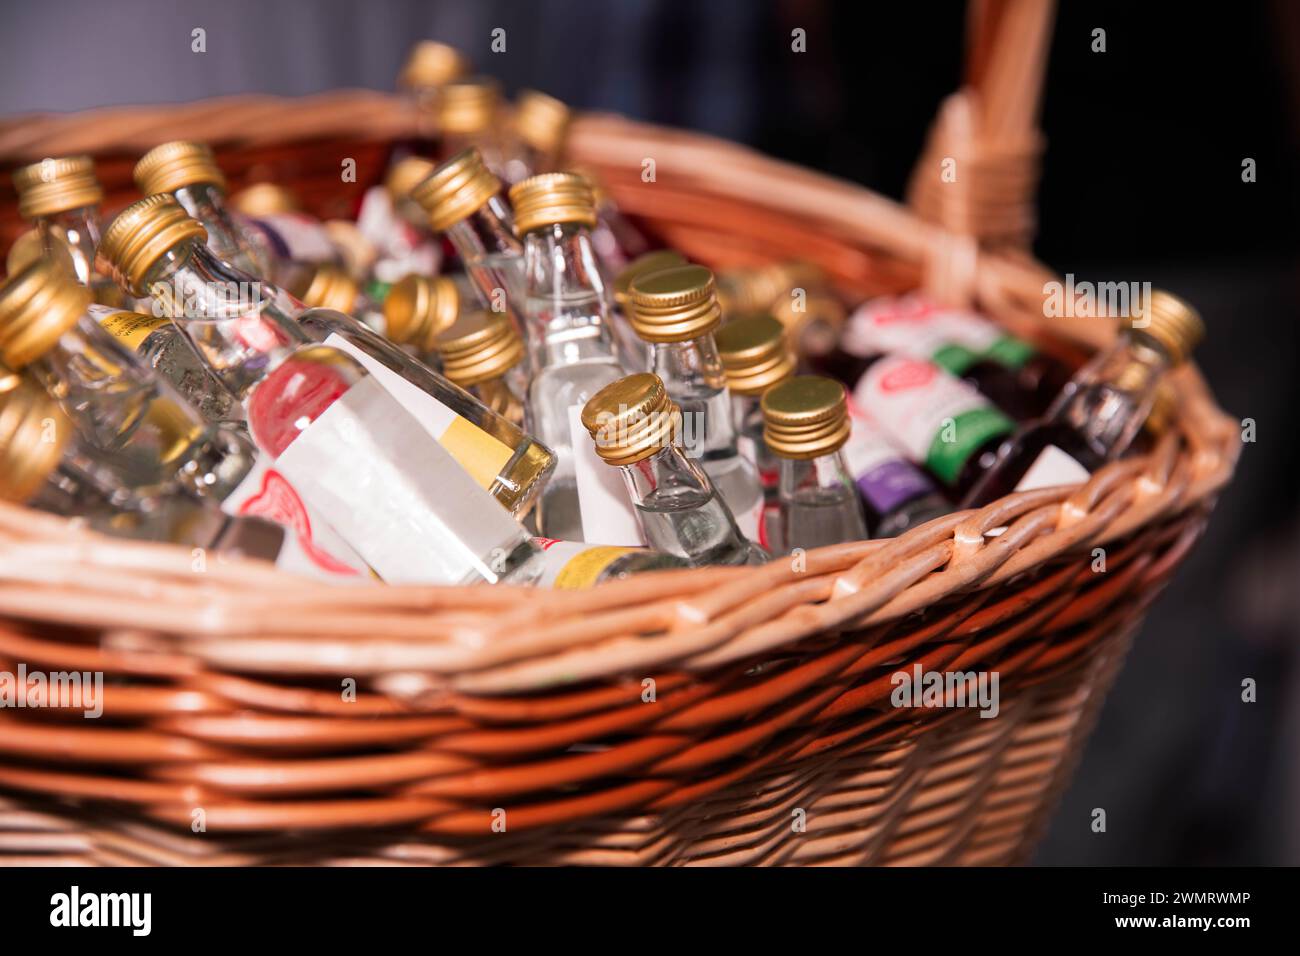 A variety of small liquor bottles displayed in a basket Stock Photo